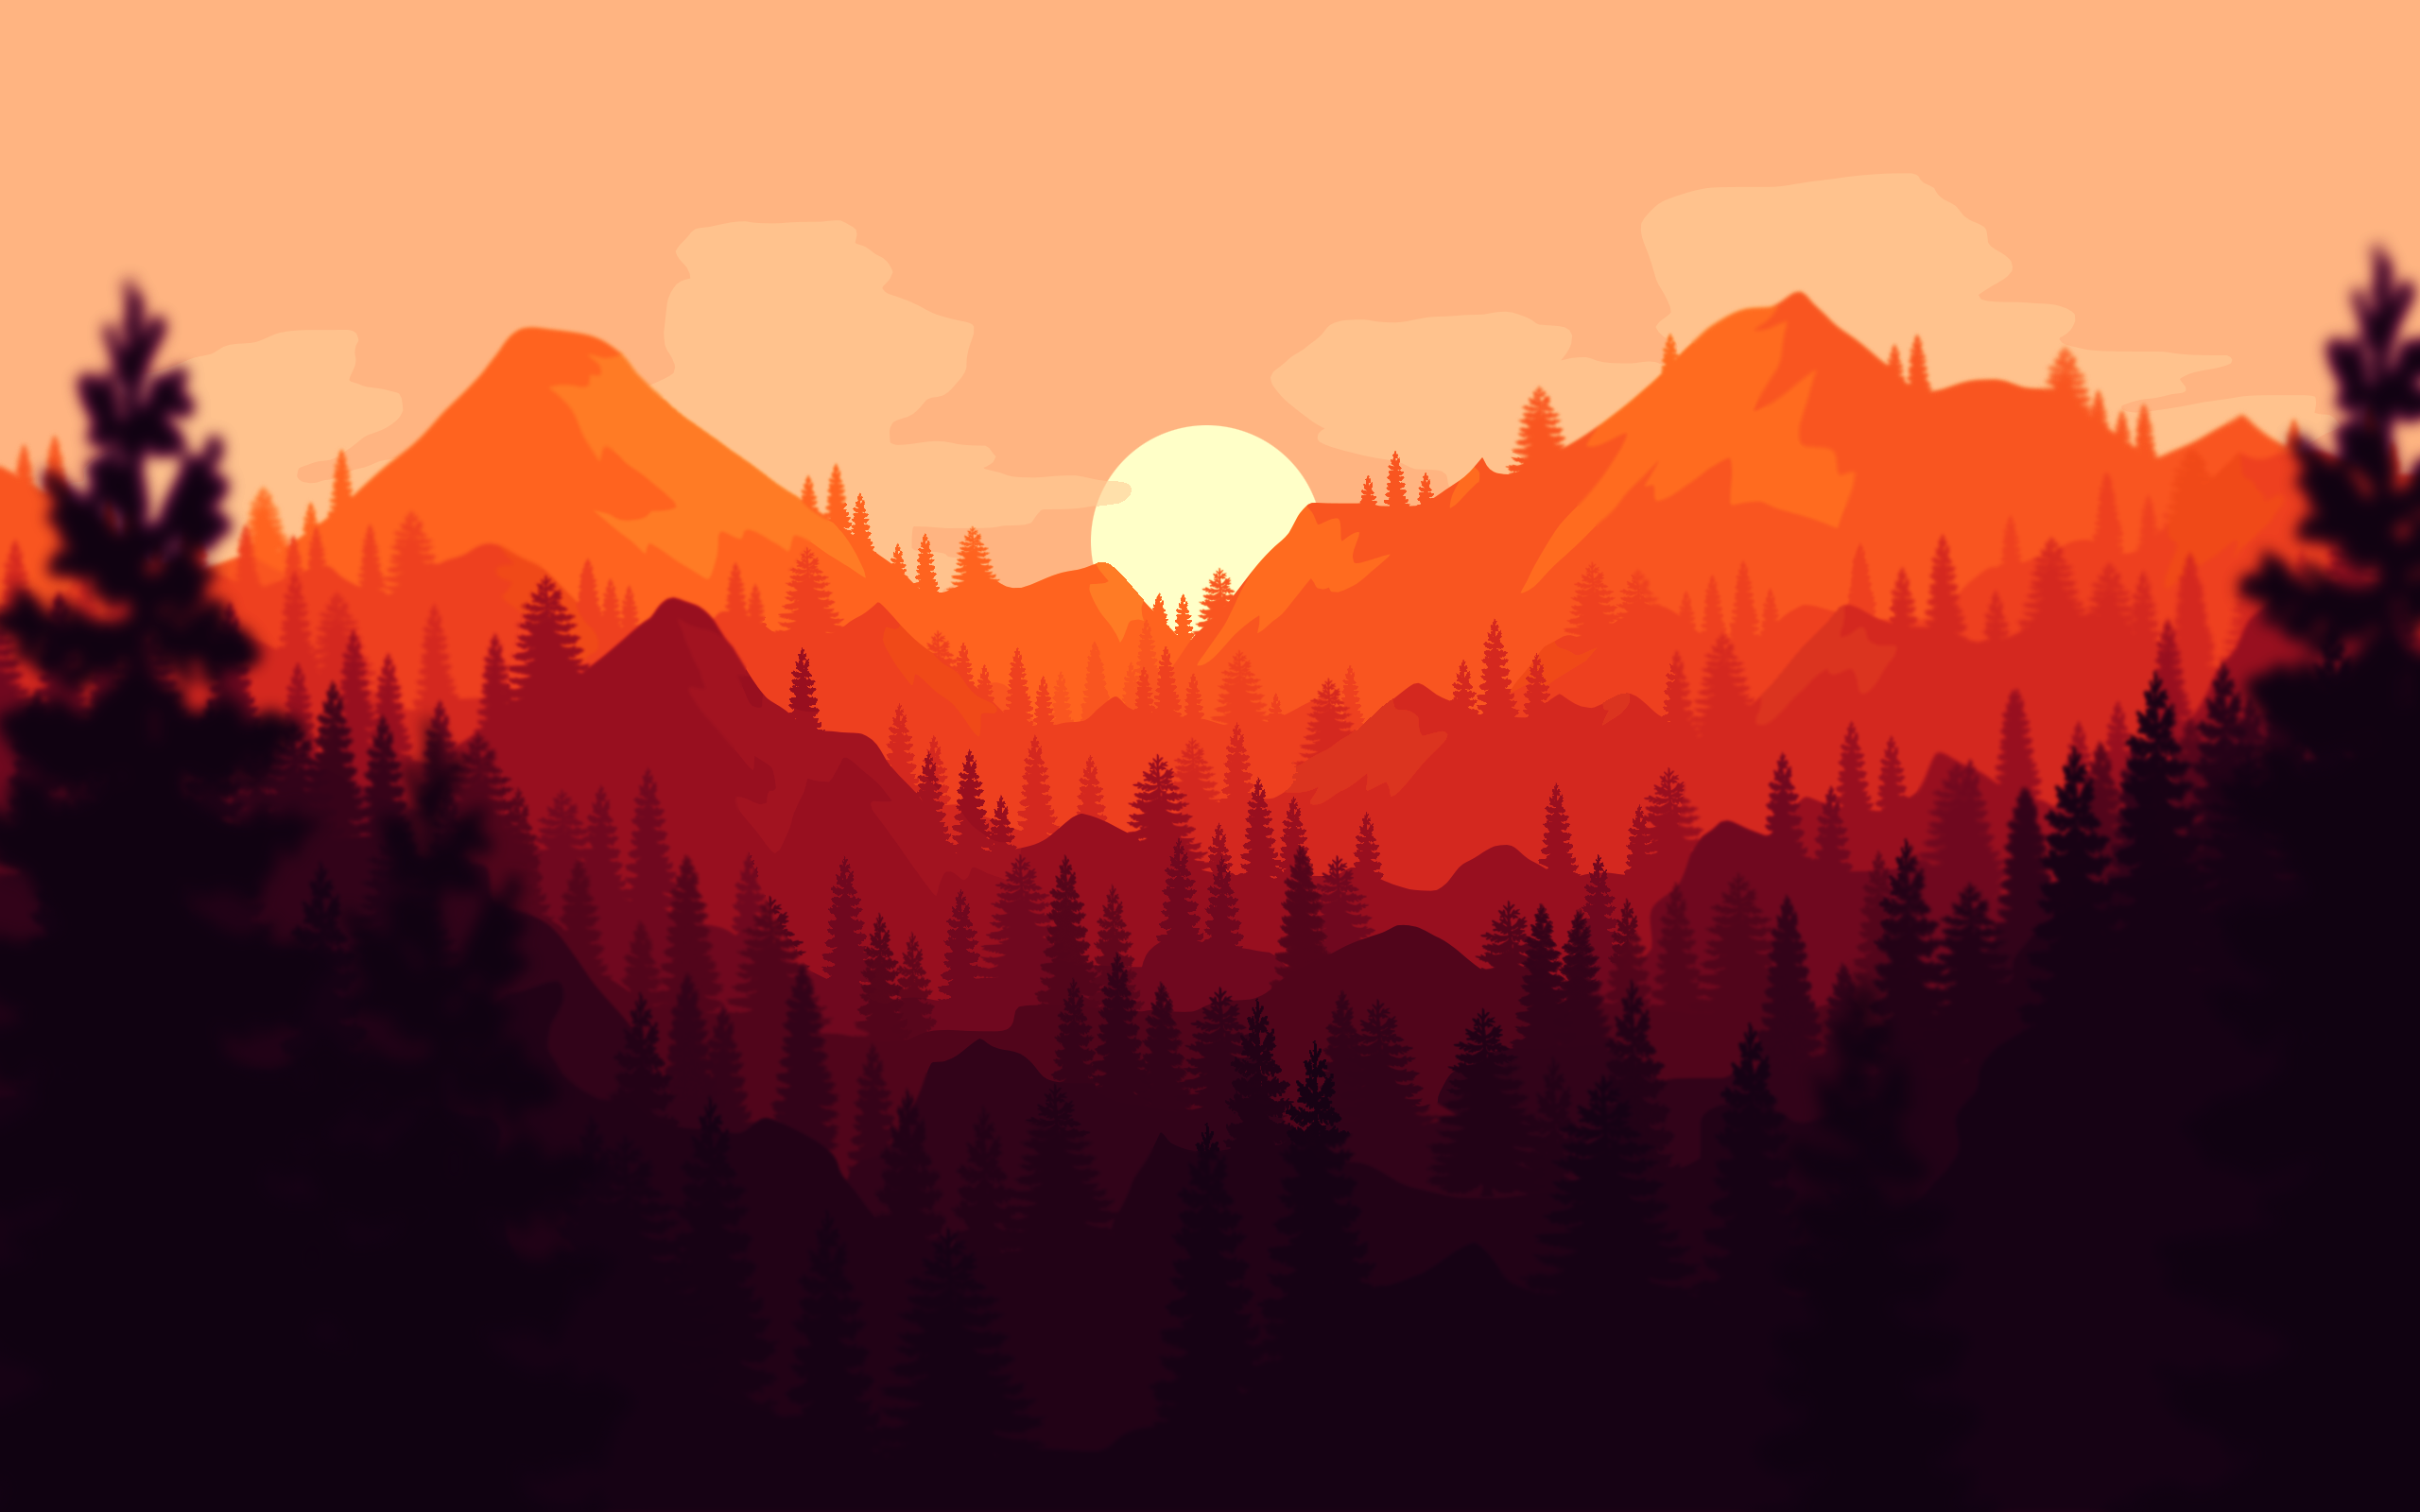 Clean Firewatch Styled Wallpaper wallpapers